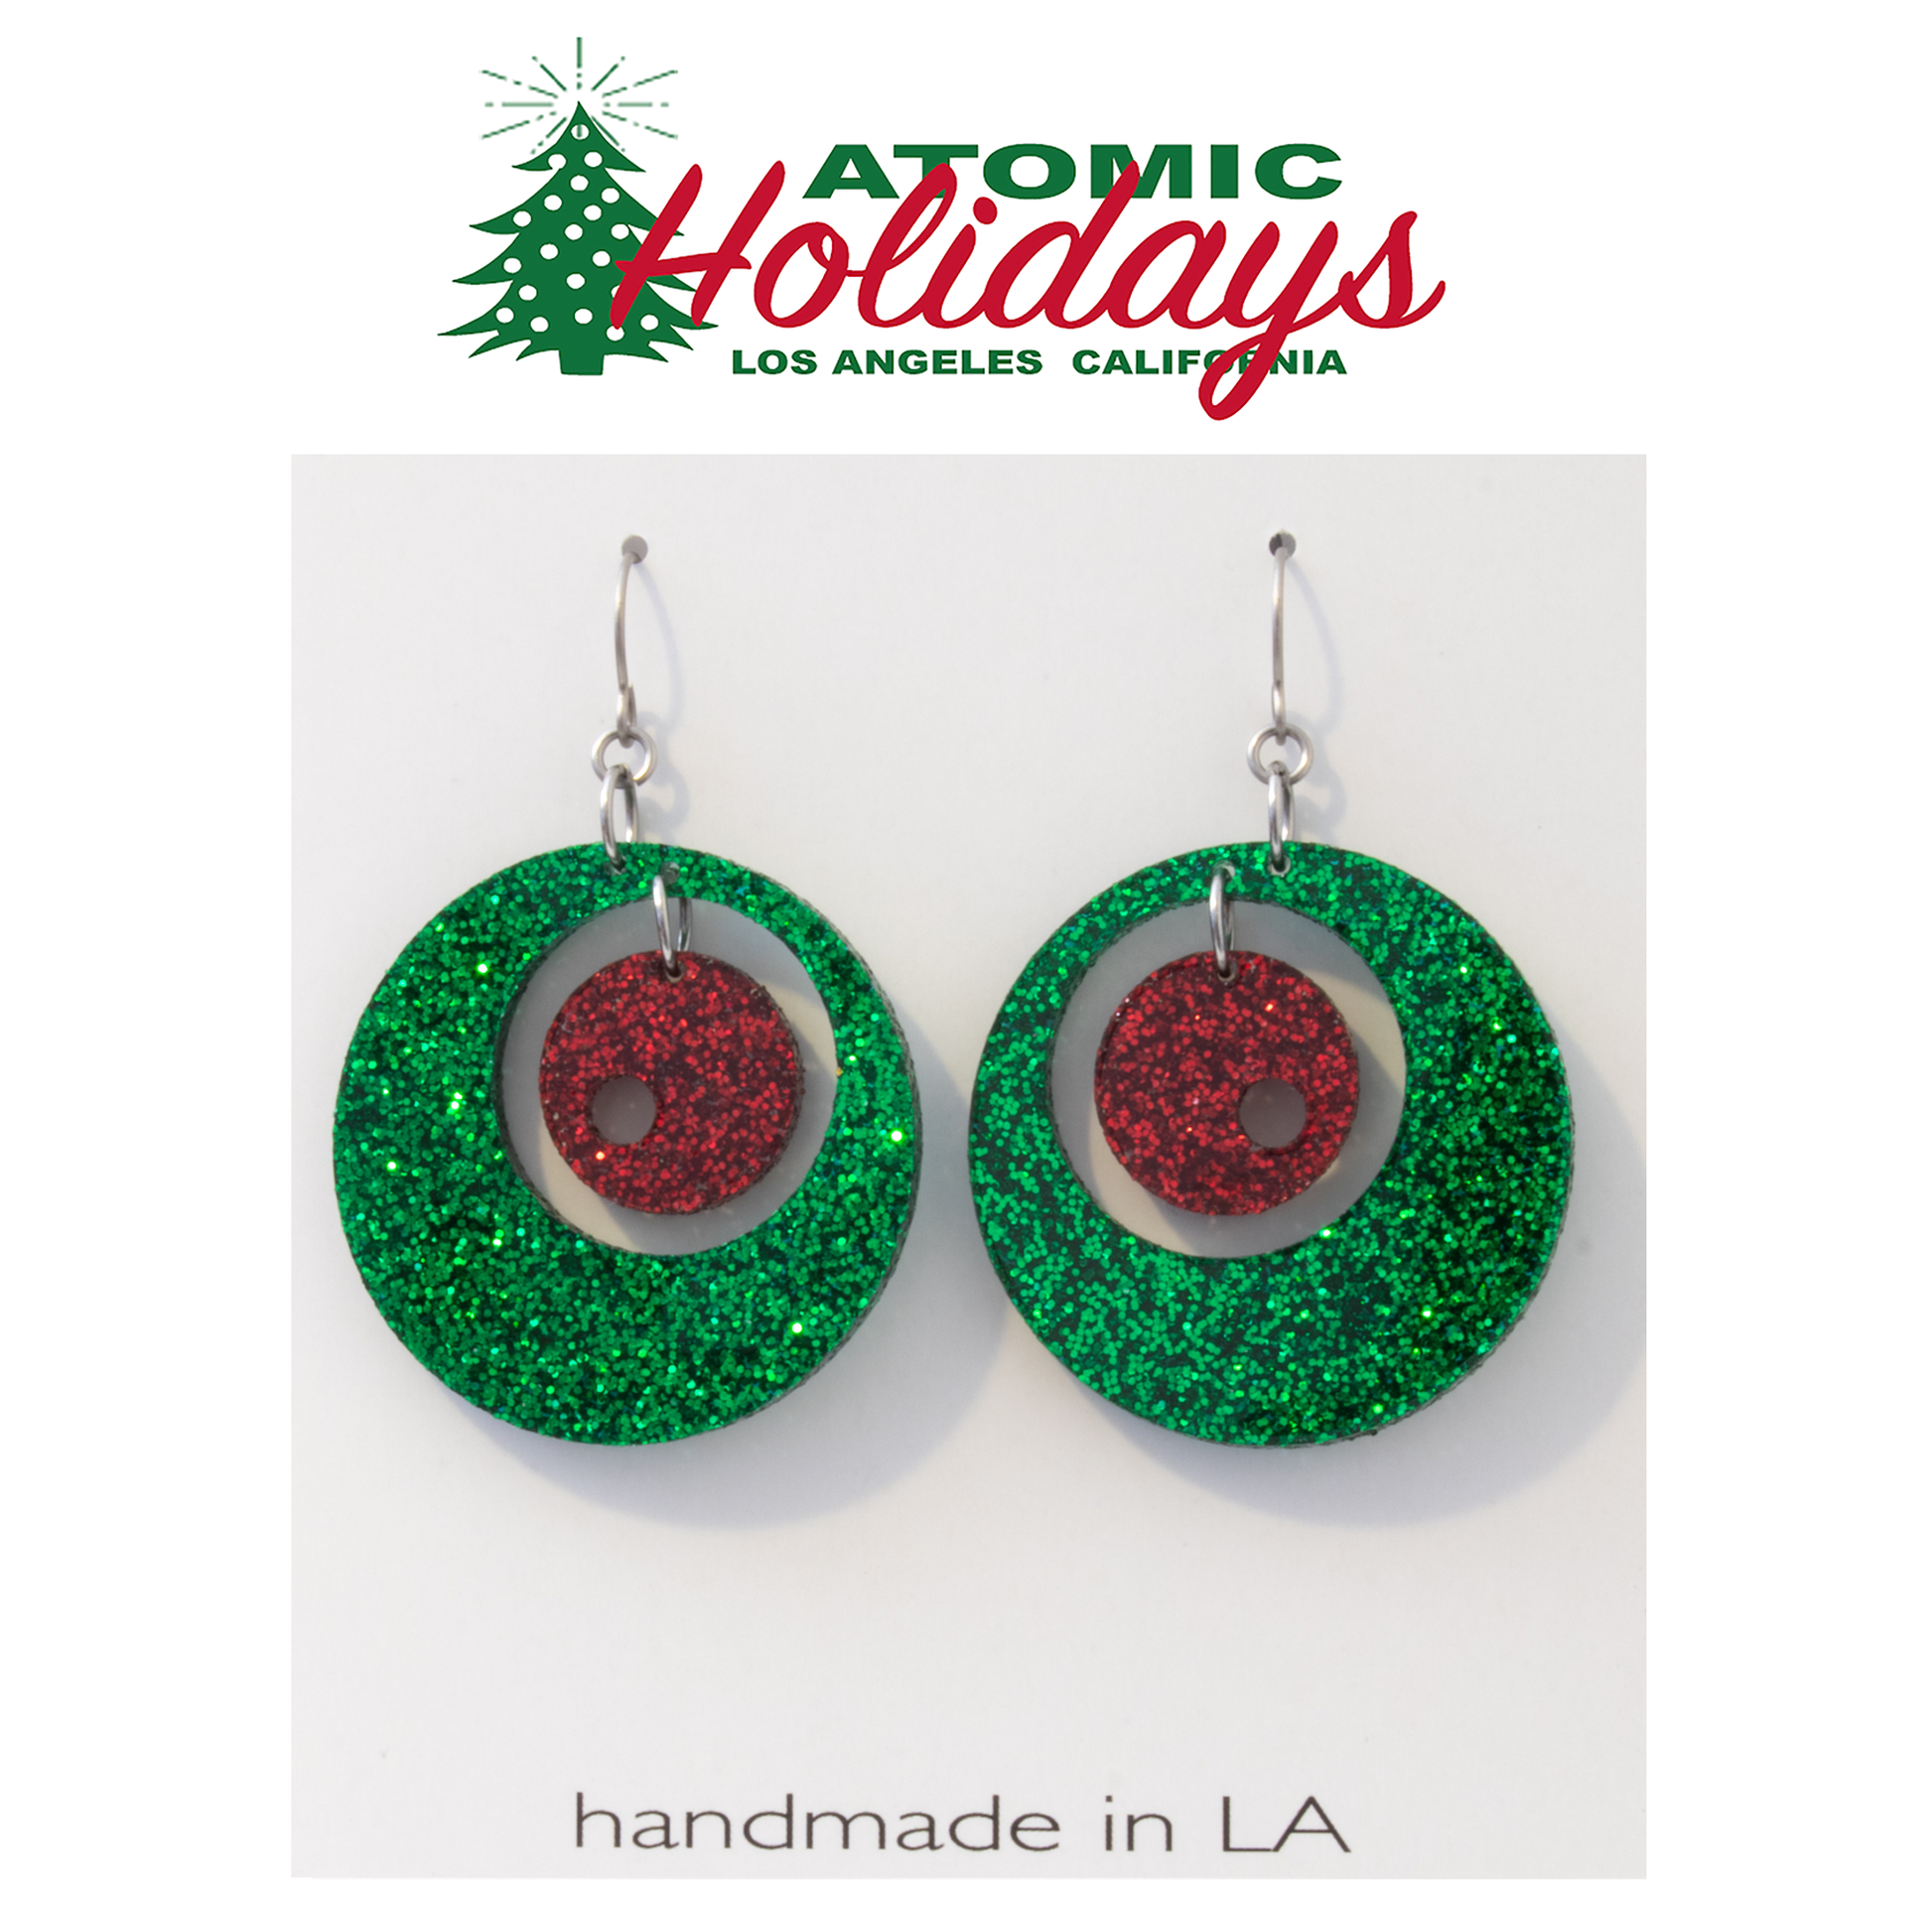 Atomic Holidays Statement Christmas Earrings in Glitter Green and Red - mid century modern groovy style by AtomicMobiles.com 